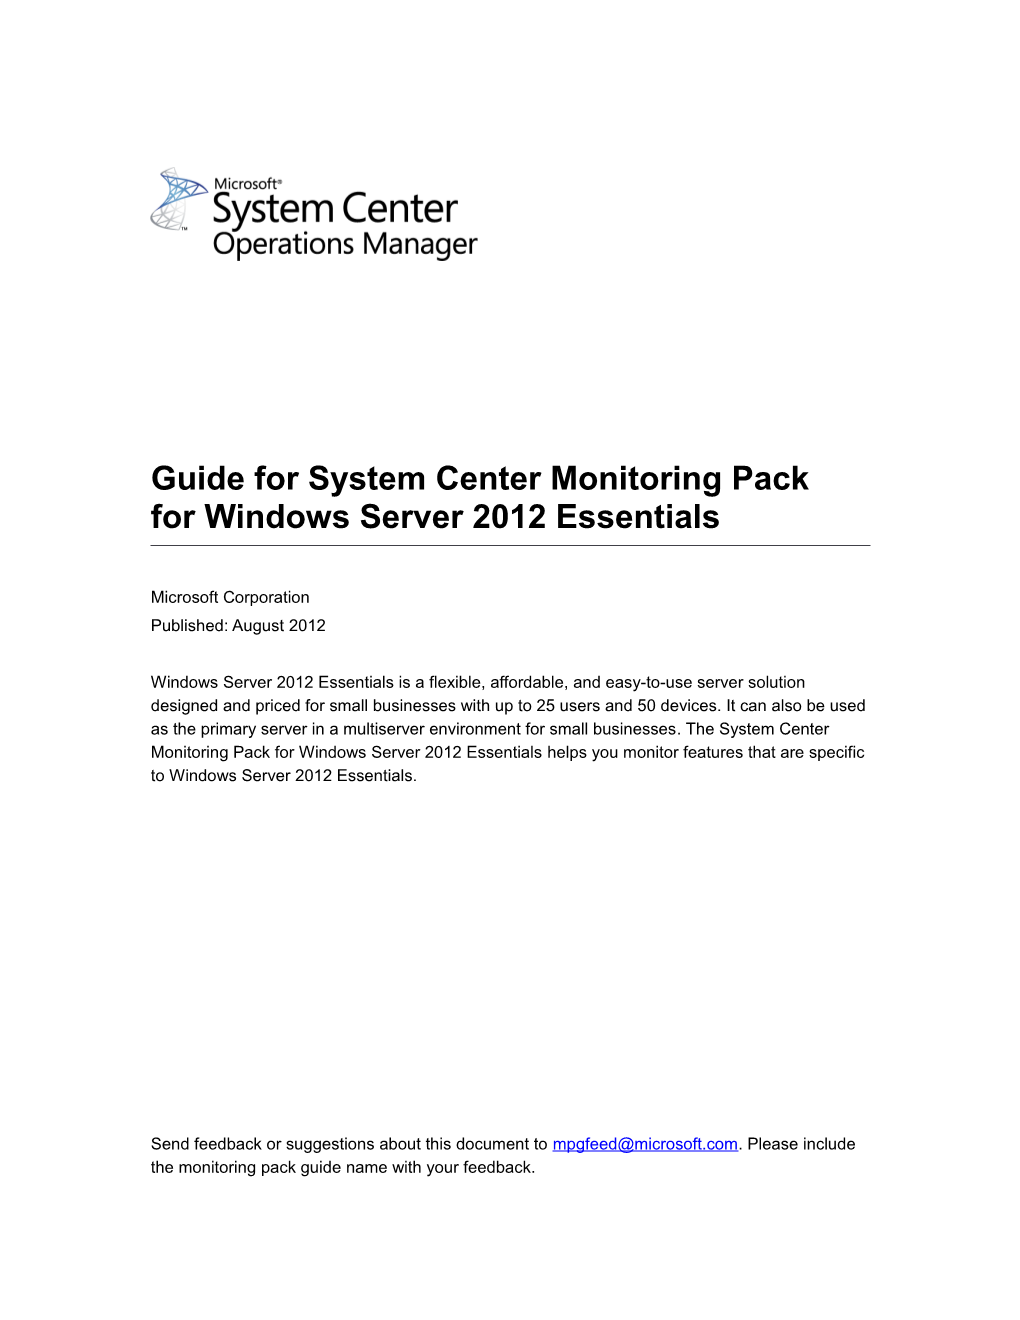 Guide for System Center Monitoring Pack